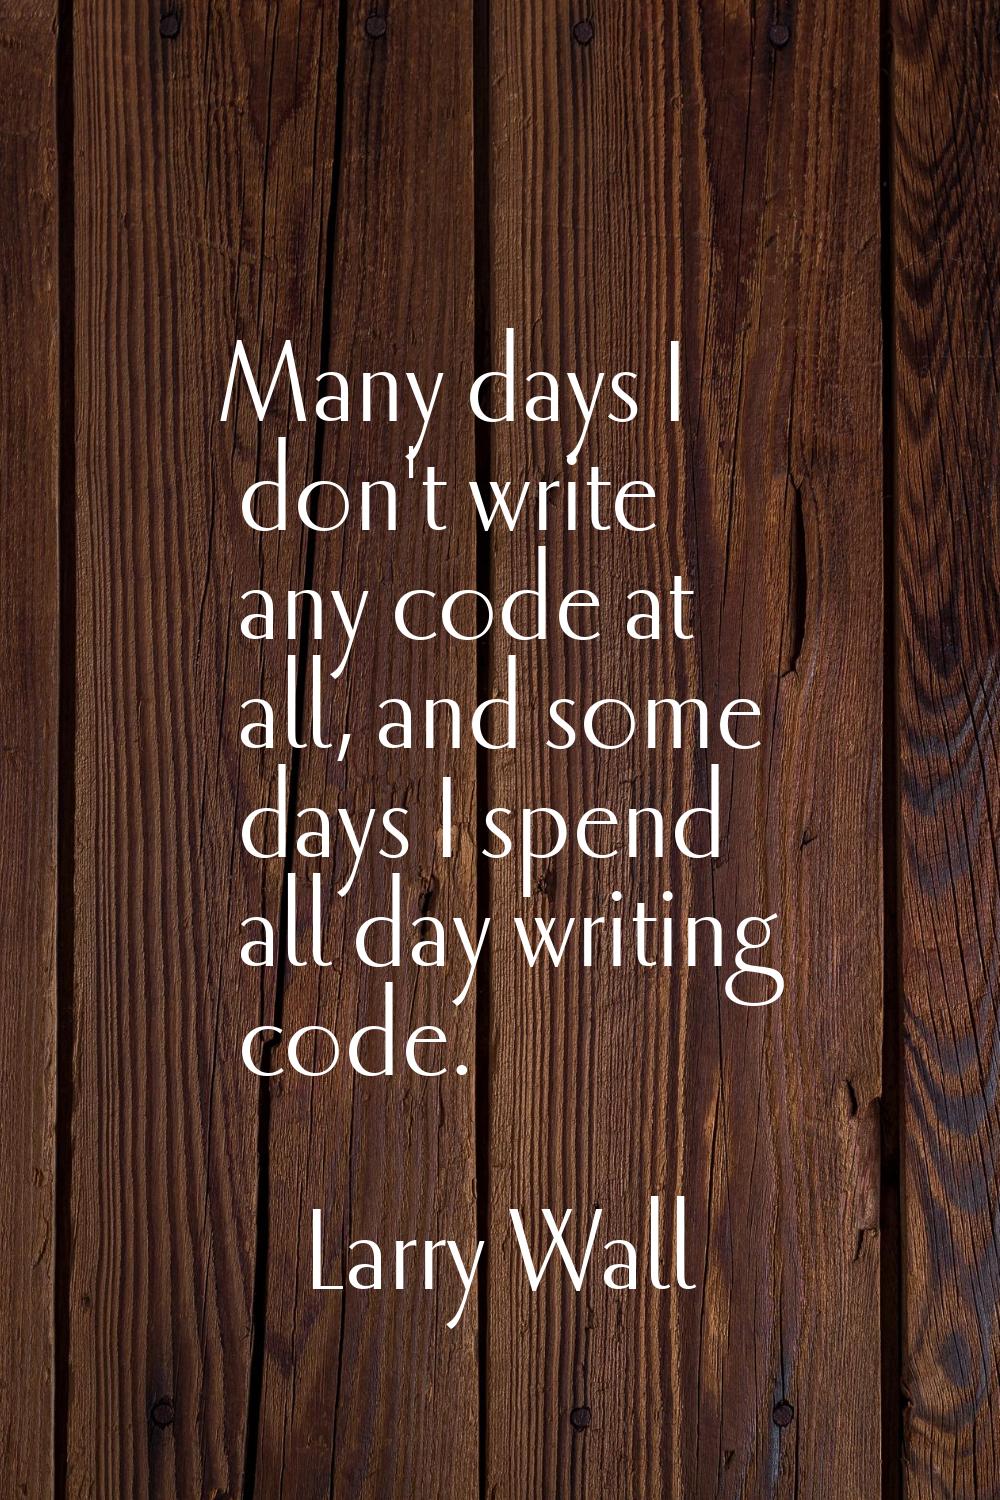 Many days I don't write any code at all, and some days I spend all day writing code.